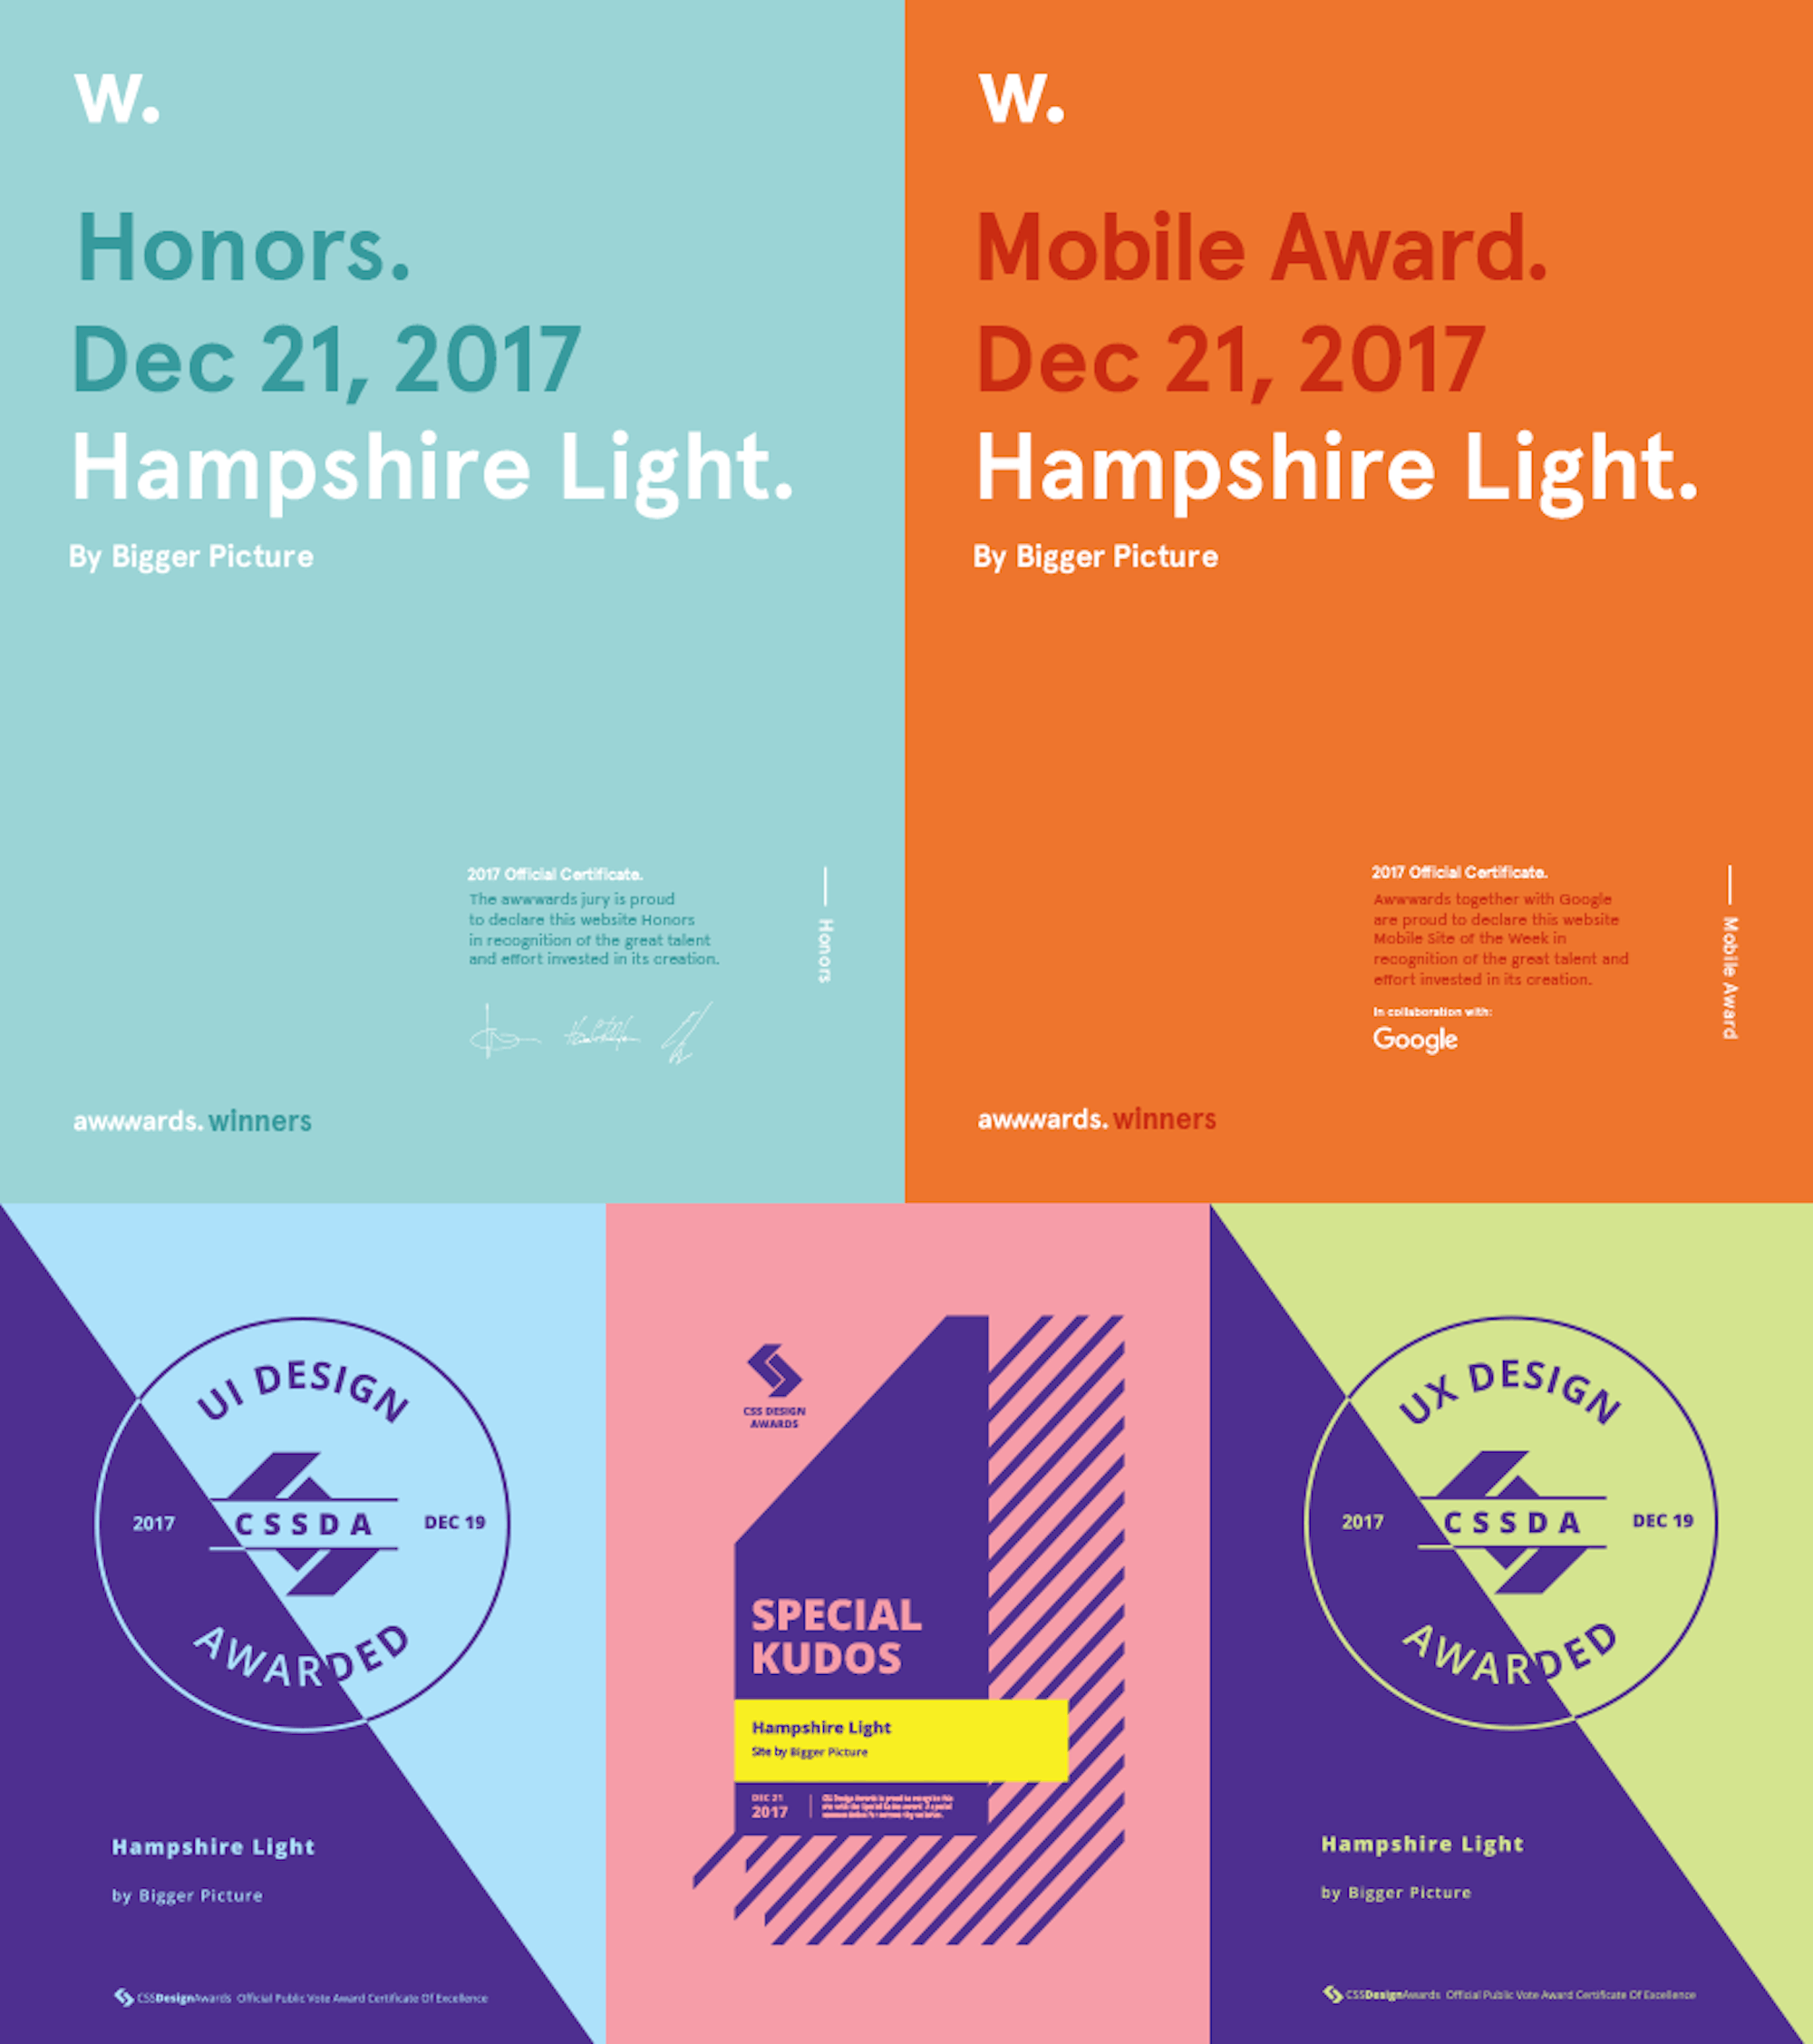 Design awards: Honourable Mention, Awwwards. Mobile Site Of The Week in collaboration with Google, Awwwards. Special Kudos, CSS Design Awards. UI Design Award, CSS Design Awards. UX Design Award, CSS Design Awards.